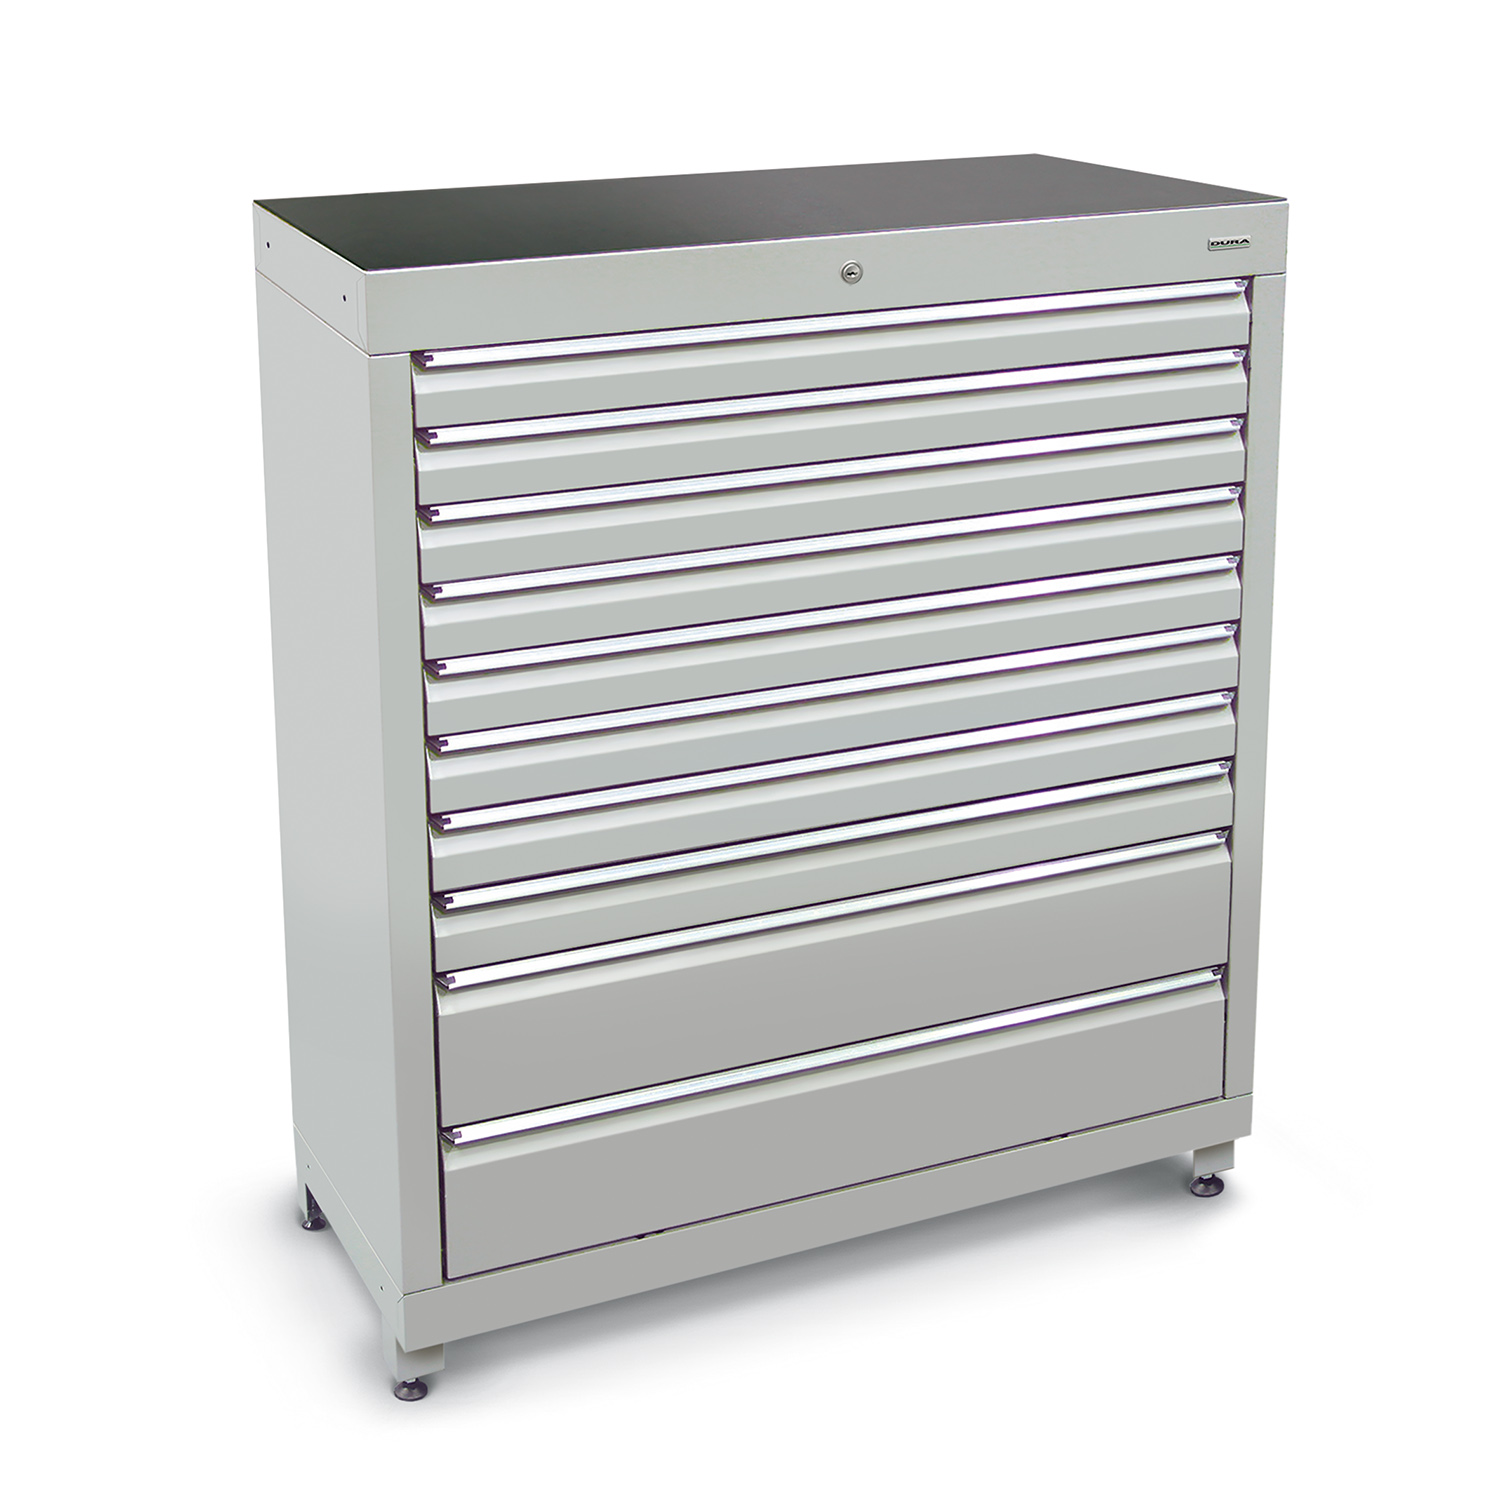 1200mm Multi-drawer high tool cabinets with 10 drawers (8 medium, 2 large) and feet